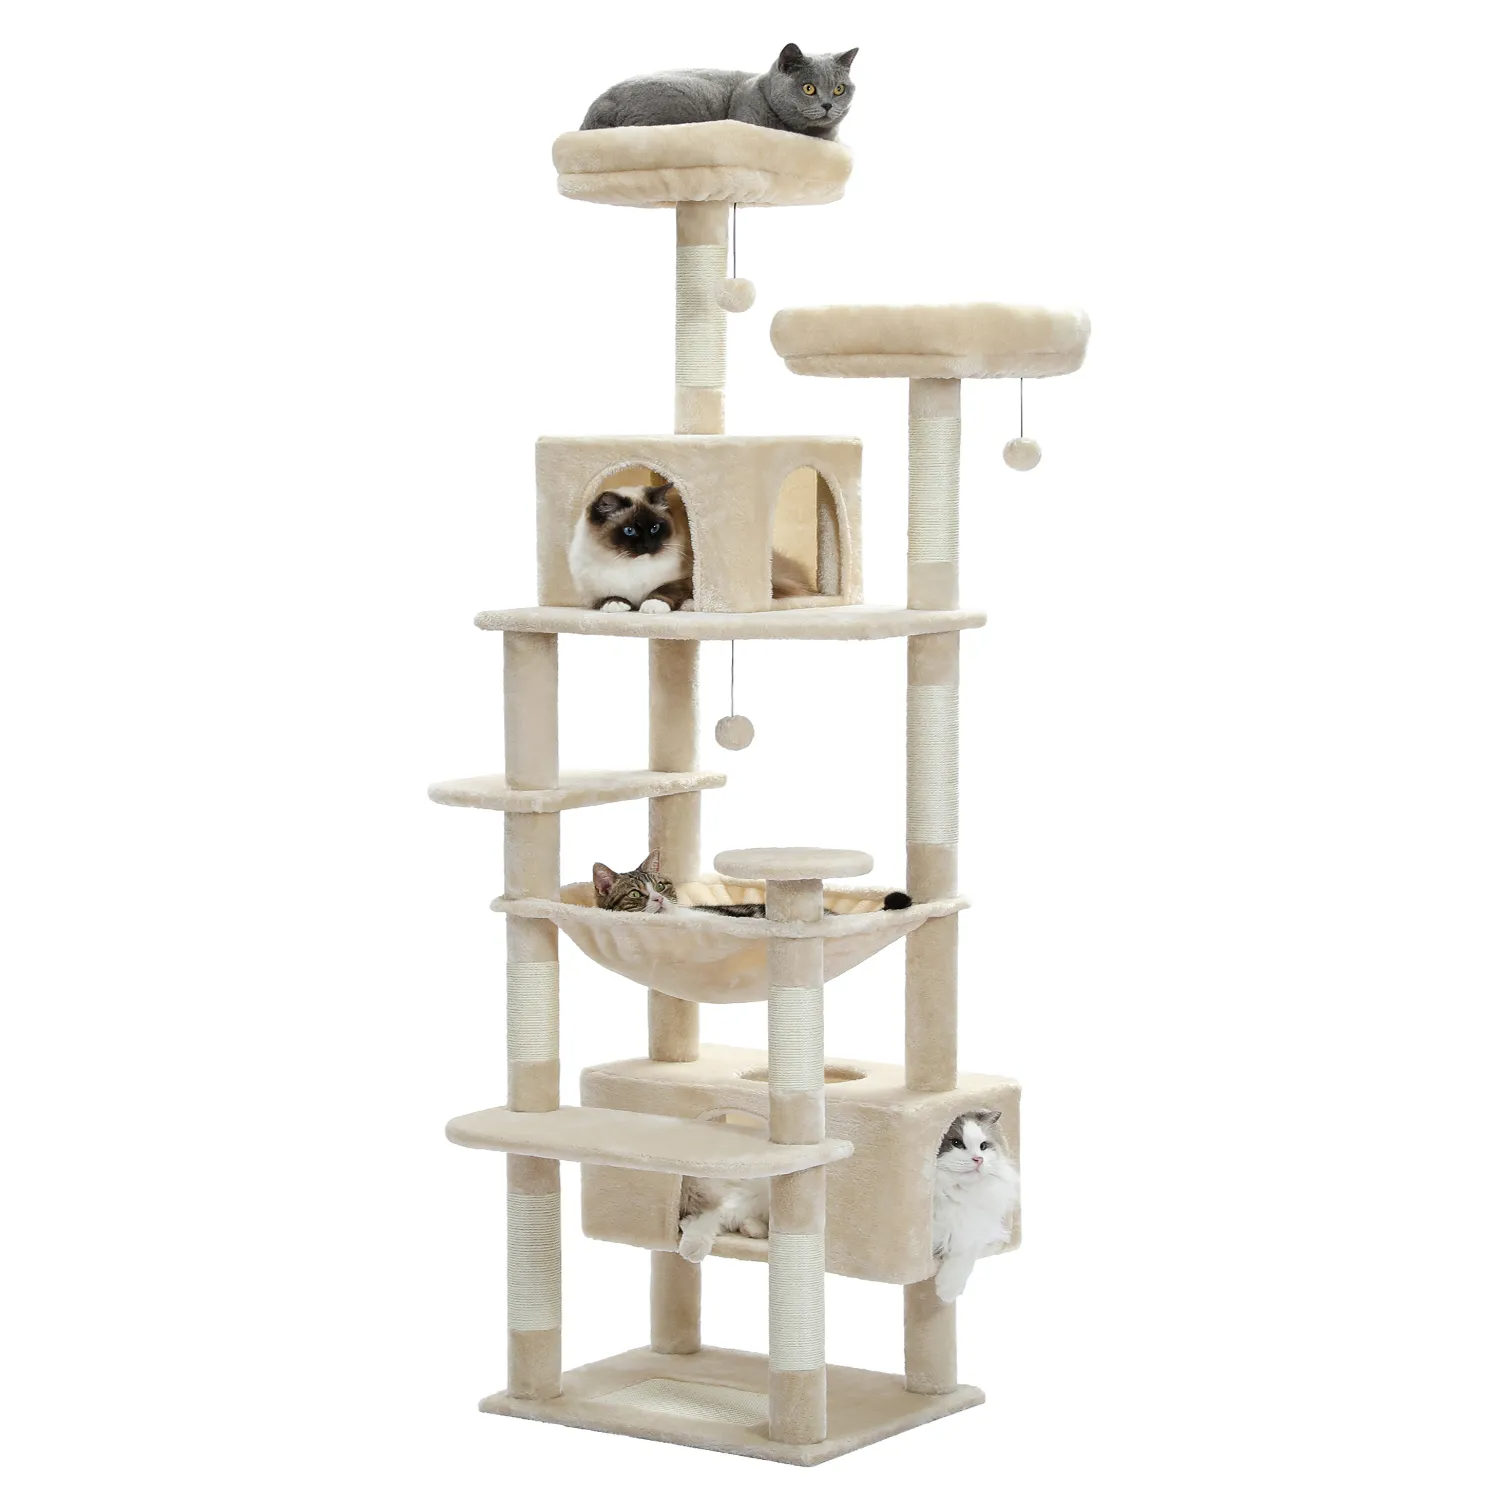 H184CM Large Cat Tower with Sisal Scratching Posts Spacious Condo Perch Stable for Kitten Multi-Level Tower Indoor Cozy Hummocks